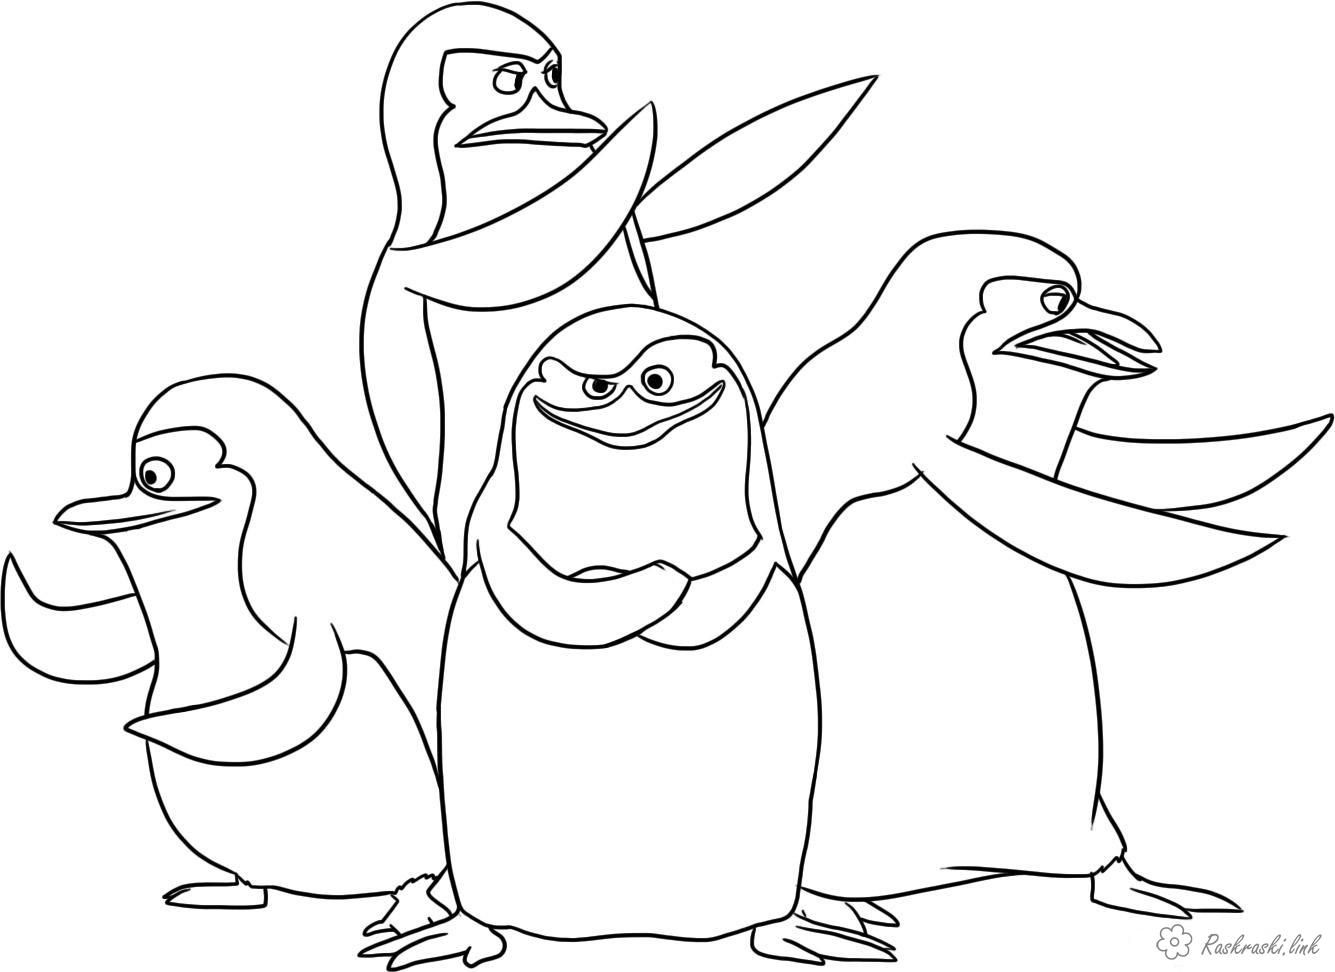 The Penguins of Madagascar Free Coloring pages online print.